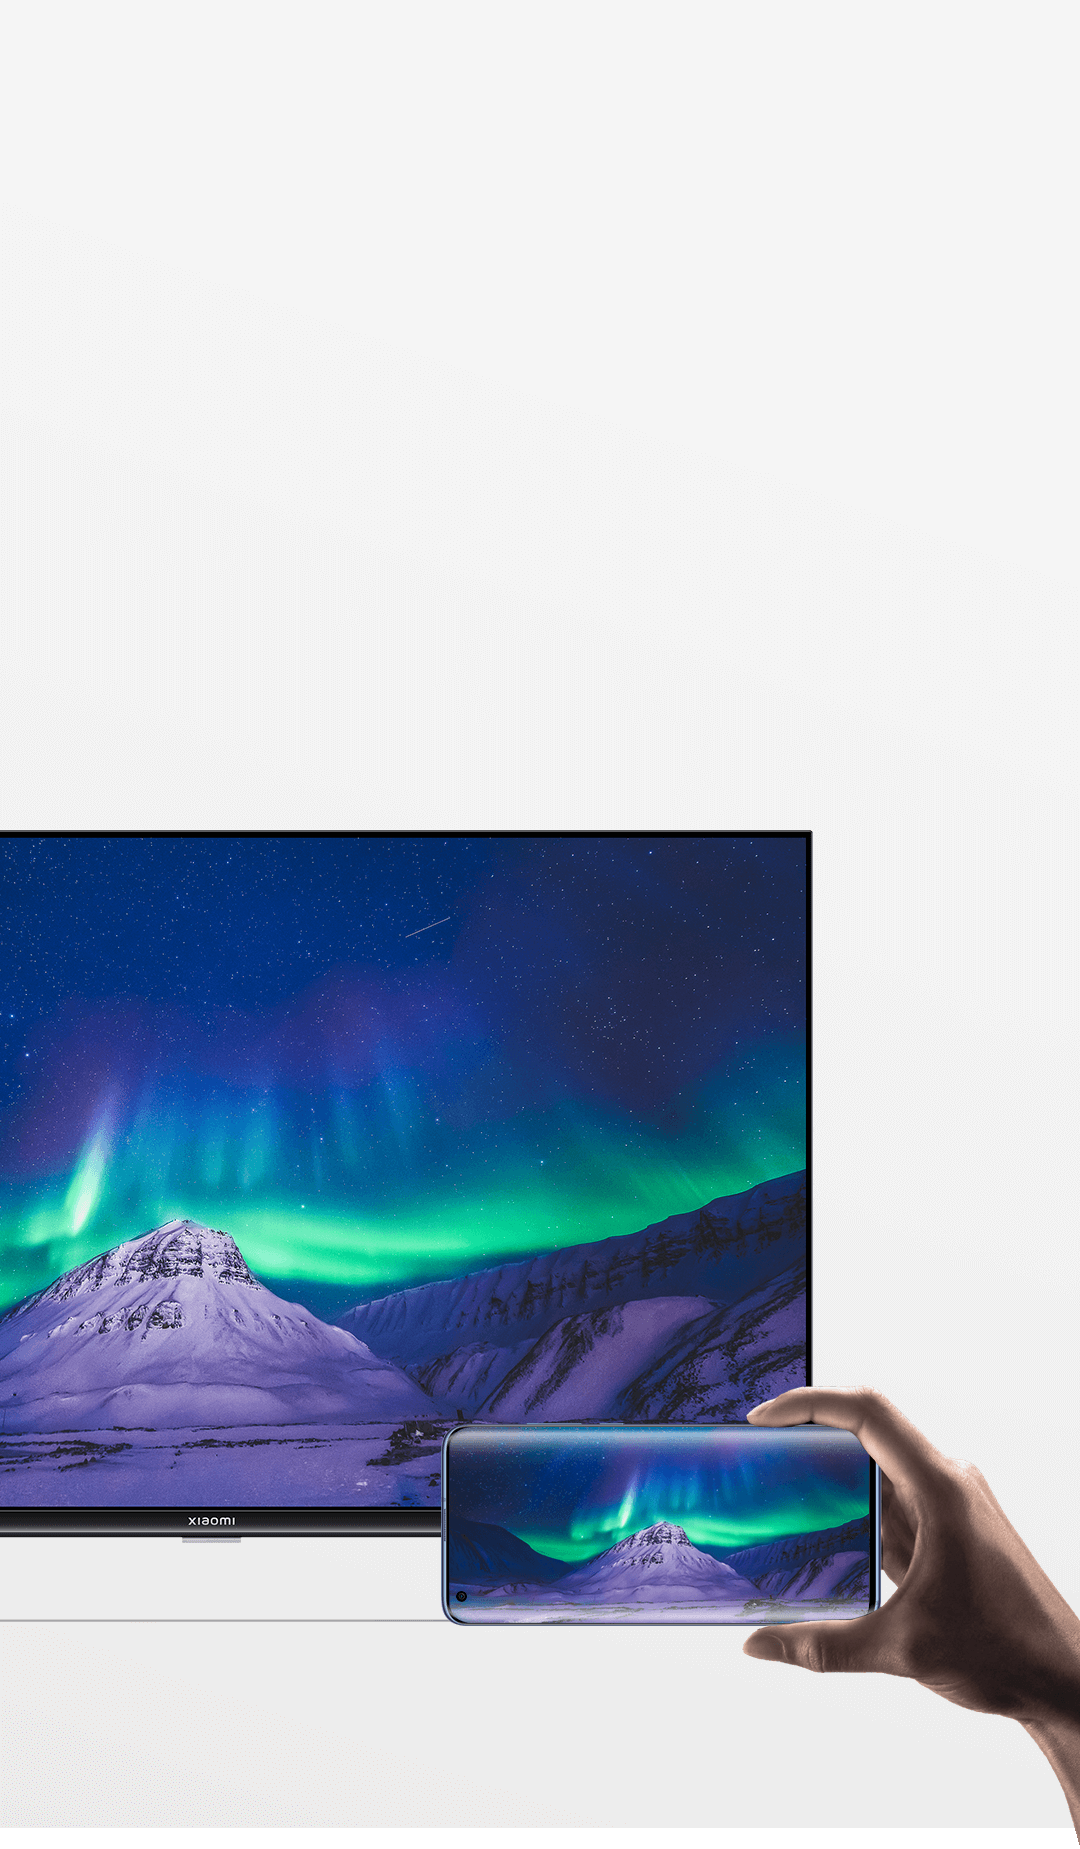 Xiaomi L32M5-5ASP HD LED Android Television 32inch (2021 Model) Online  Shopping on Xiaomi L32M5-5ASP HD LED Android Television 32inch (2021 Model)  in Muscat, Sohar, Duqum, Salalah, Sur in Oman